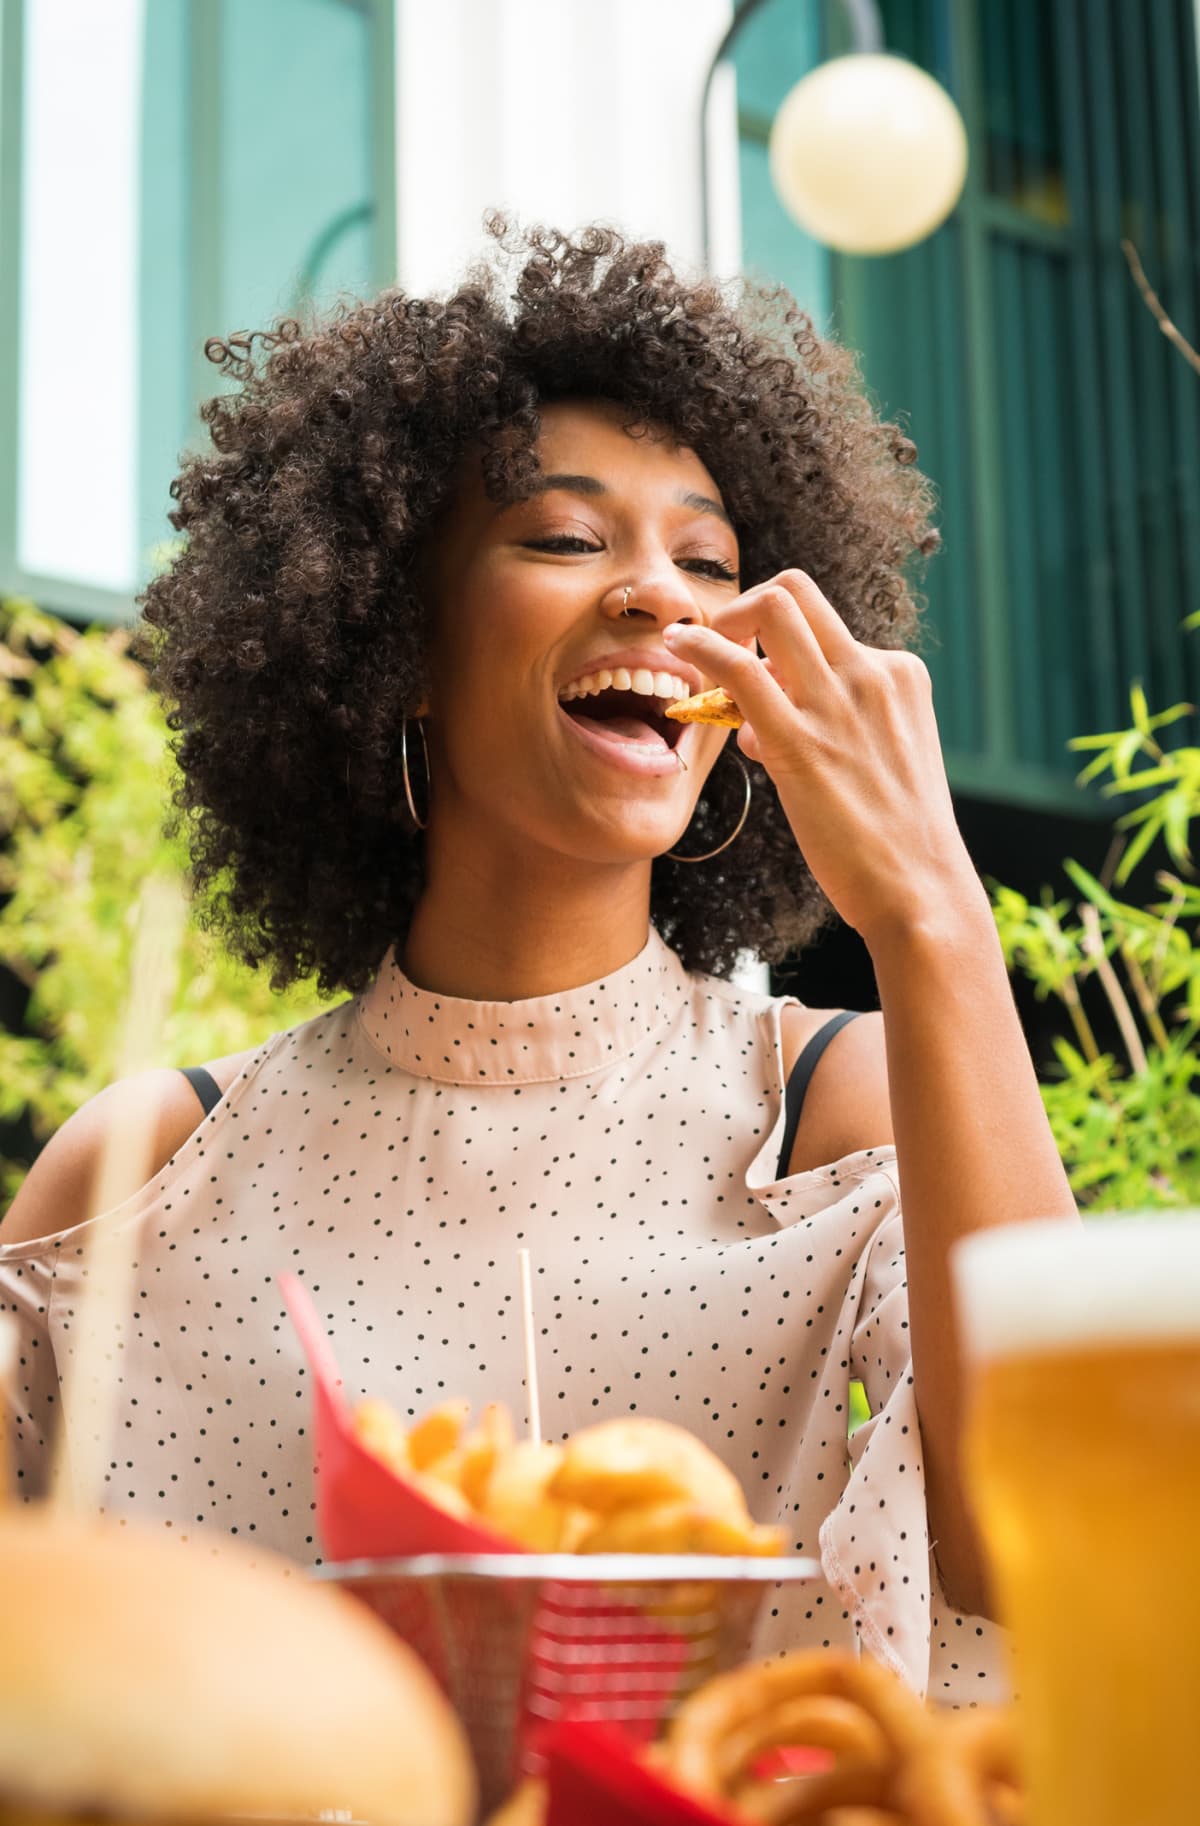 Smiling beautiful young happy Black woman with nose piercing eating potato wedges in a pub in a low angle view over food and glasses of beer